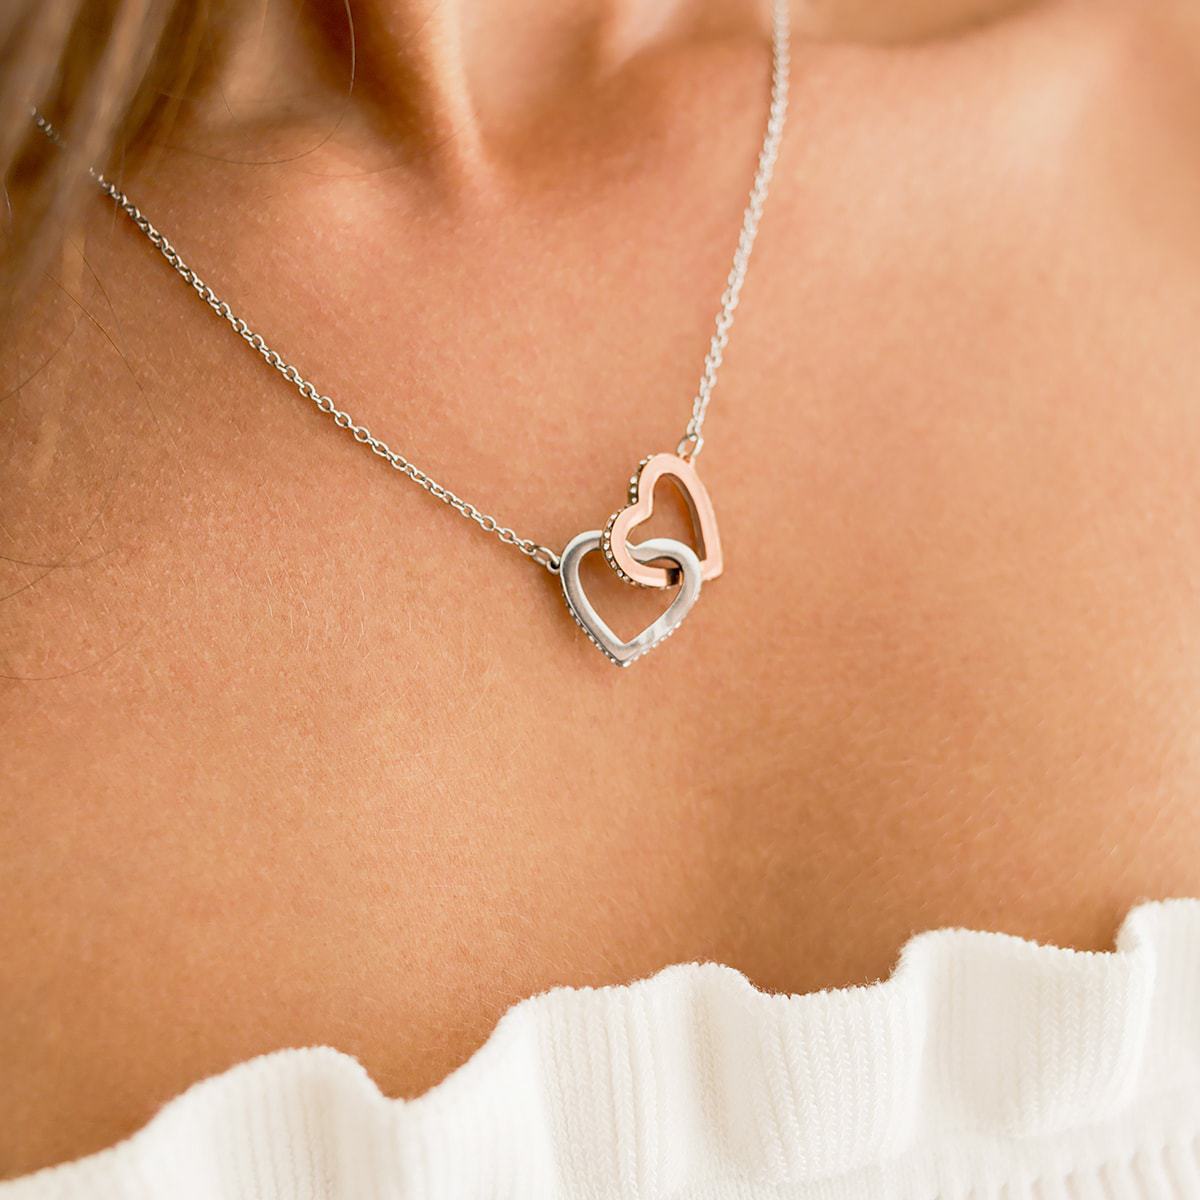 To My Wife, I May Not Be Your First Date - Interlocking Hearts Necklace Gift Set